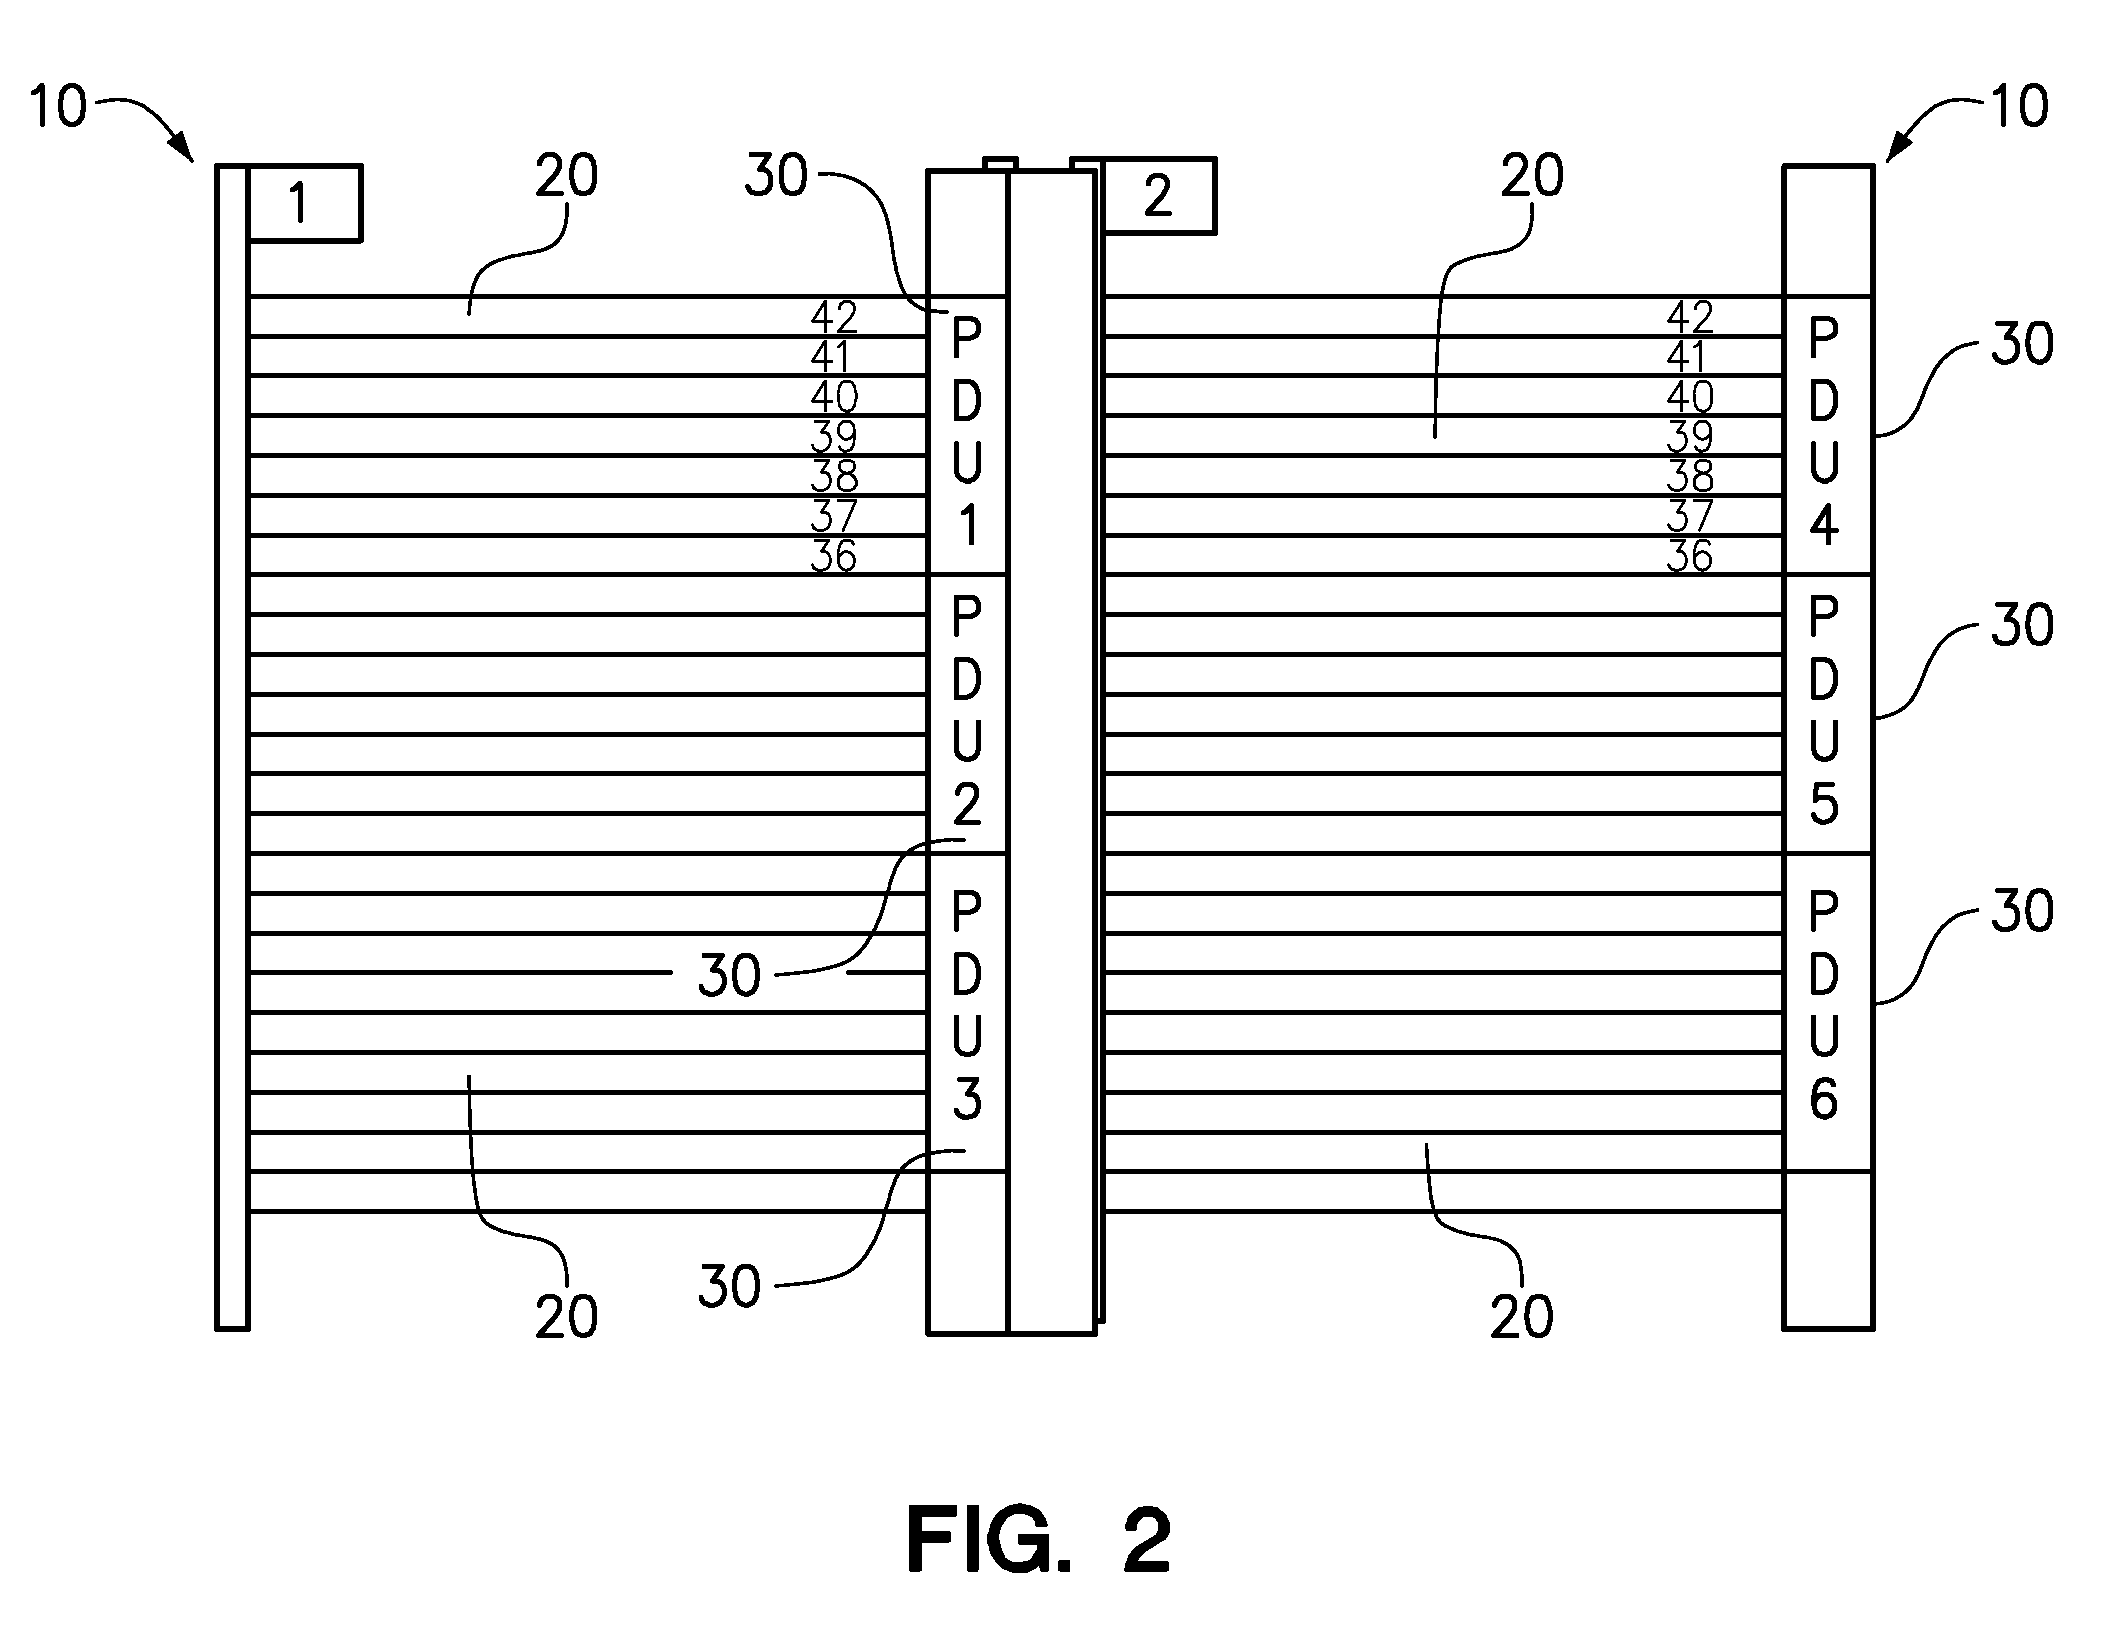 Sequential power up of devices in a computing cluster based on relative commonality